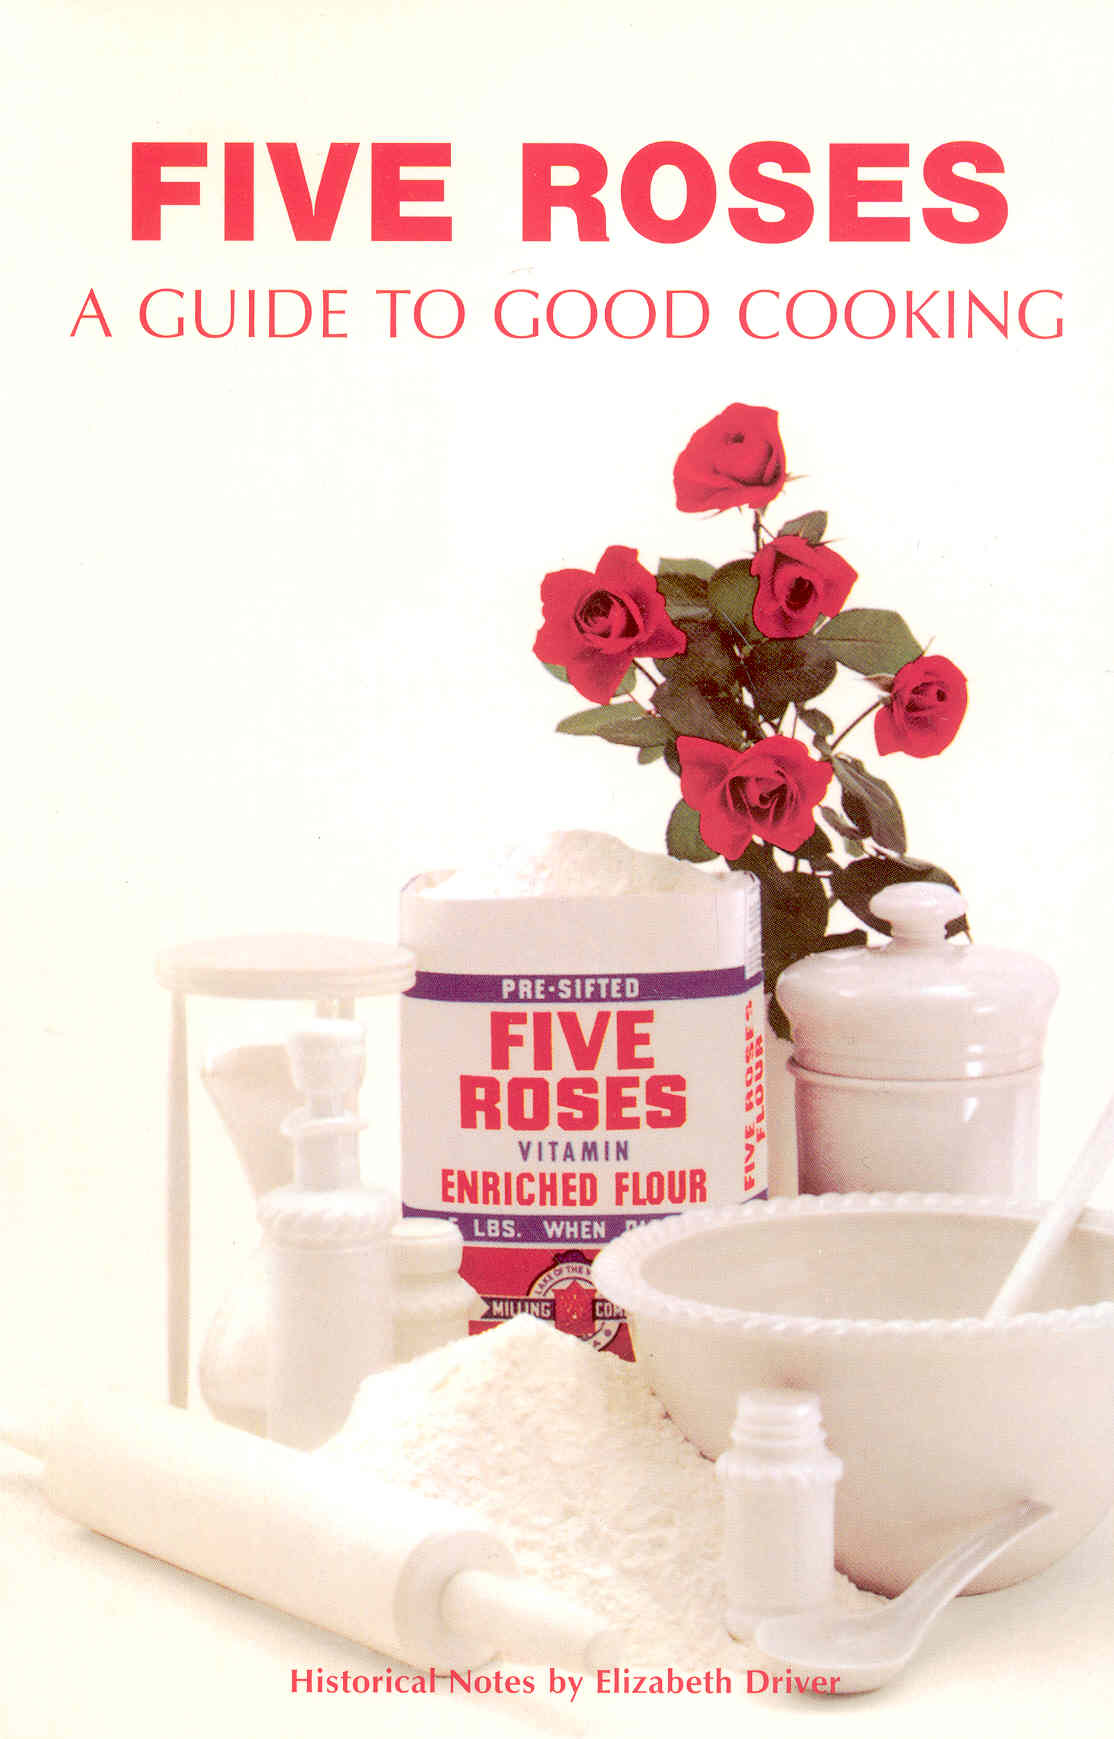 Five Roses Guide to Good Cooking Cookbook Recipe Guide Used Book